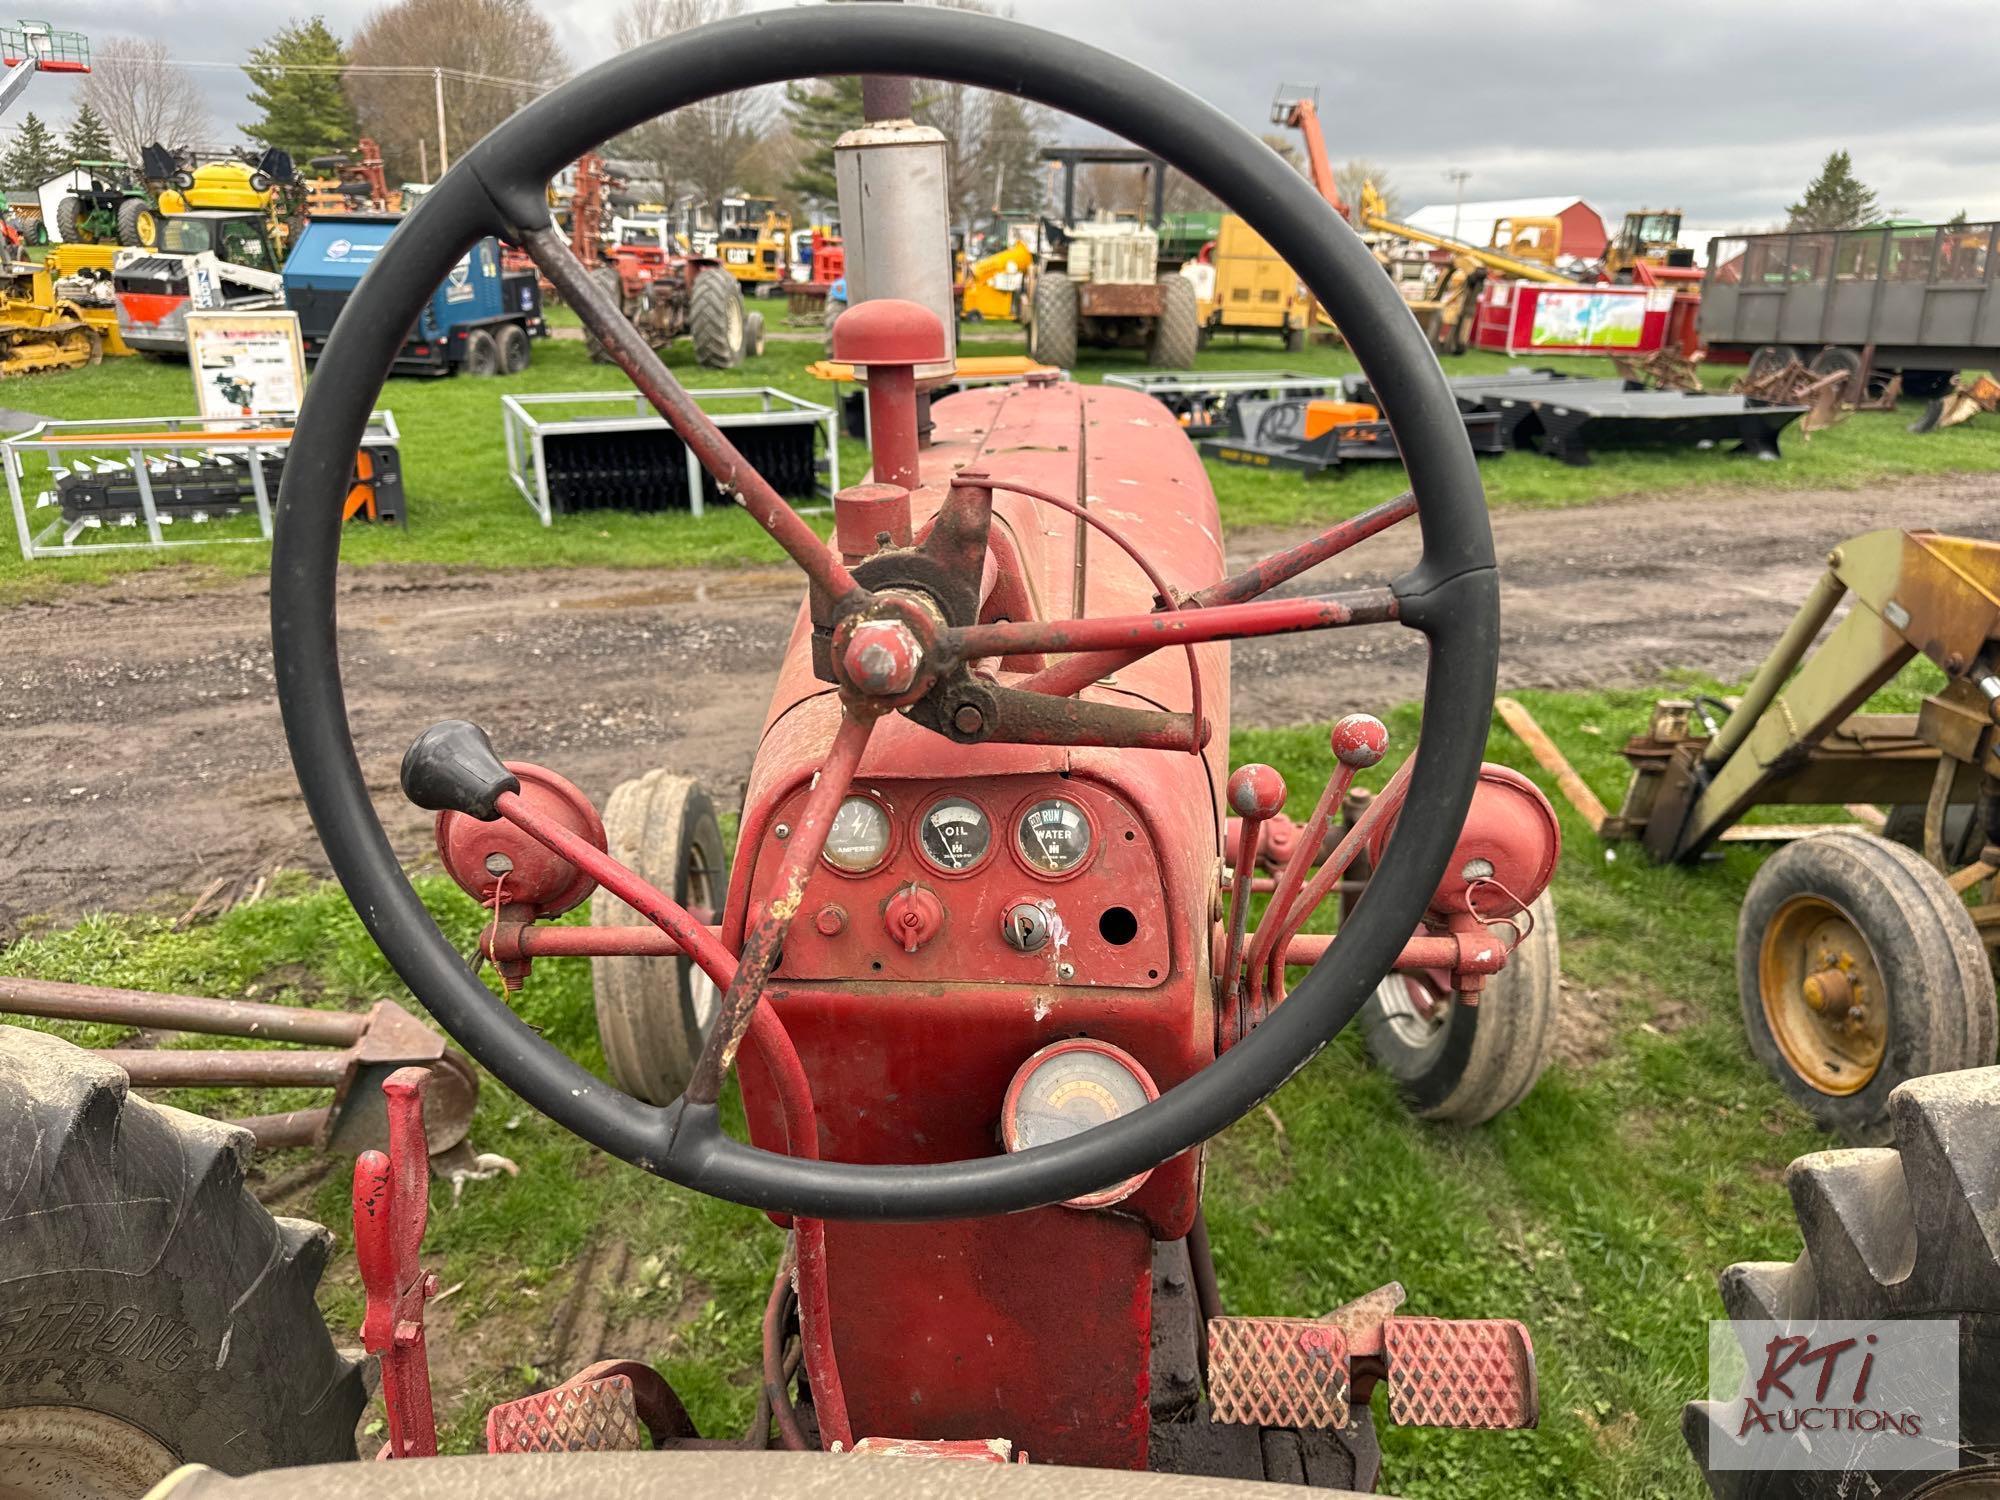 McCormick Farmall 400 tractor, wide front end, PTO, remote, draw bar, torque amplifier, gas